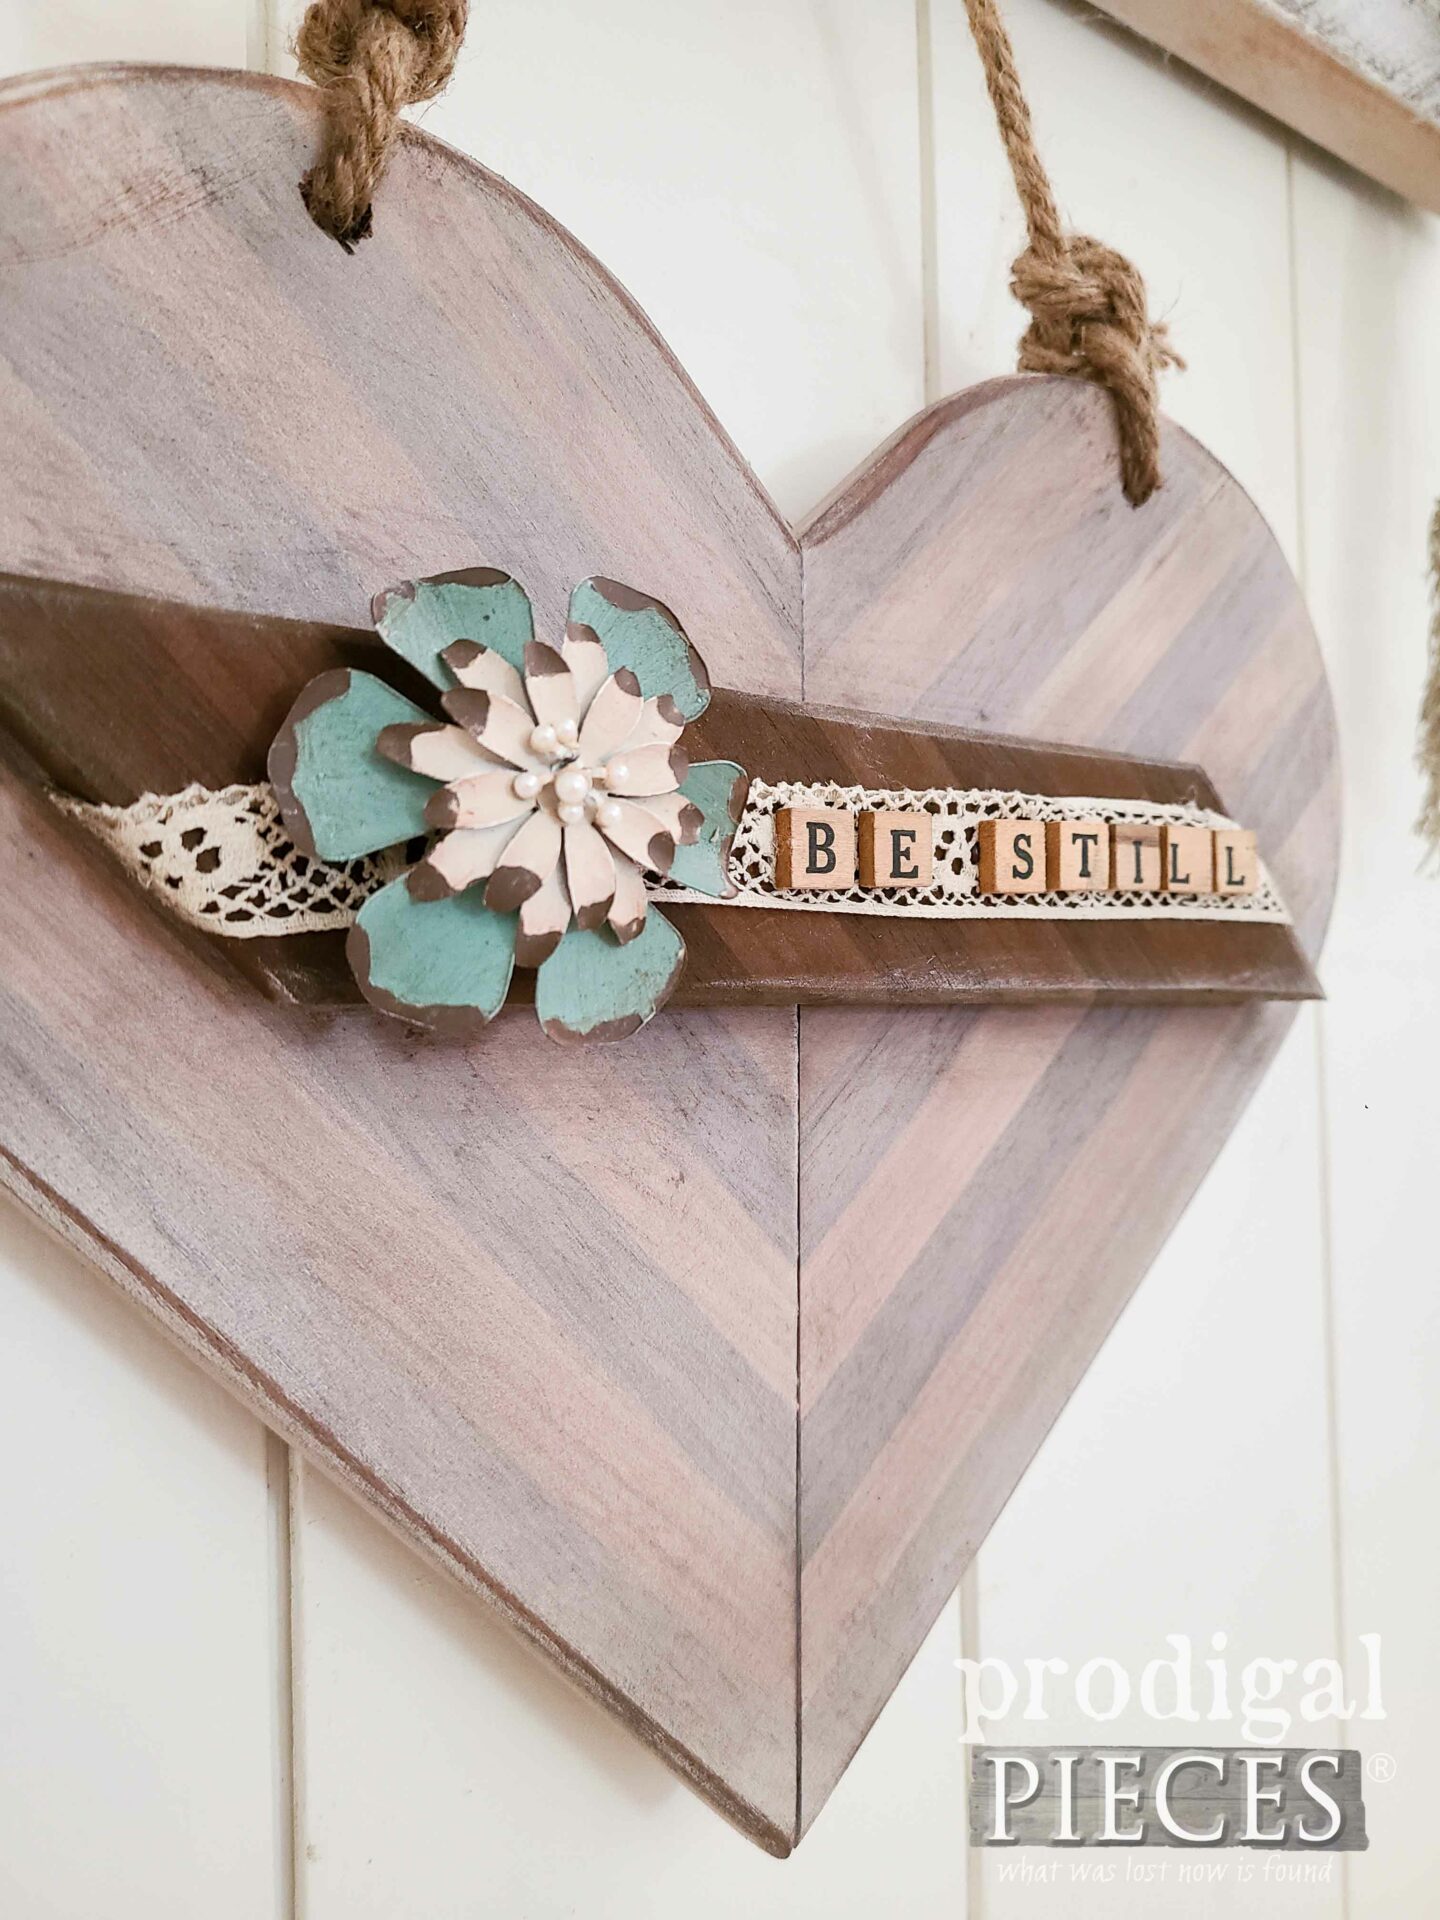 Upcycled Wooden Trivet into Farmhouse Heart with Be Still by Larissa of Prodigal Pieces | prodigalpieces.com #prodigalpieces #rustic #farmhouse